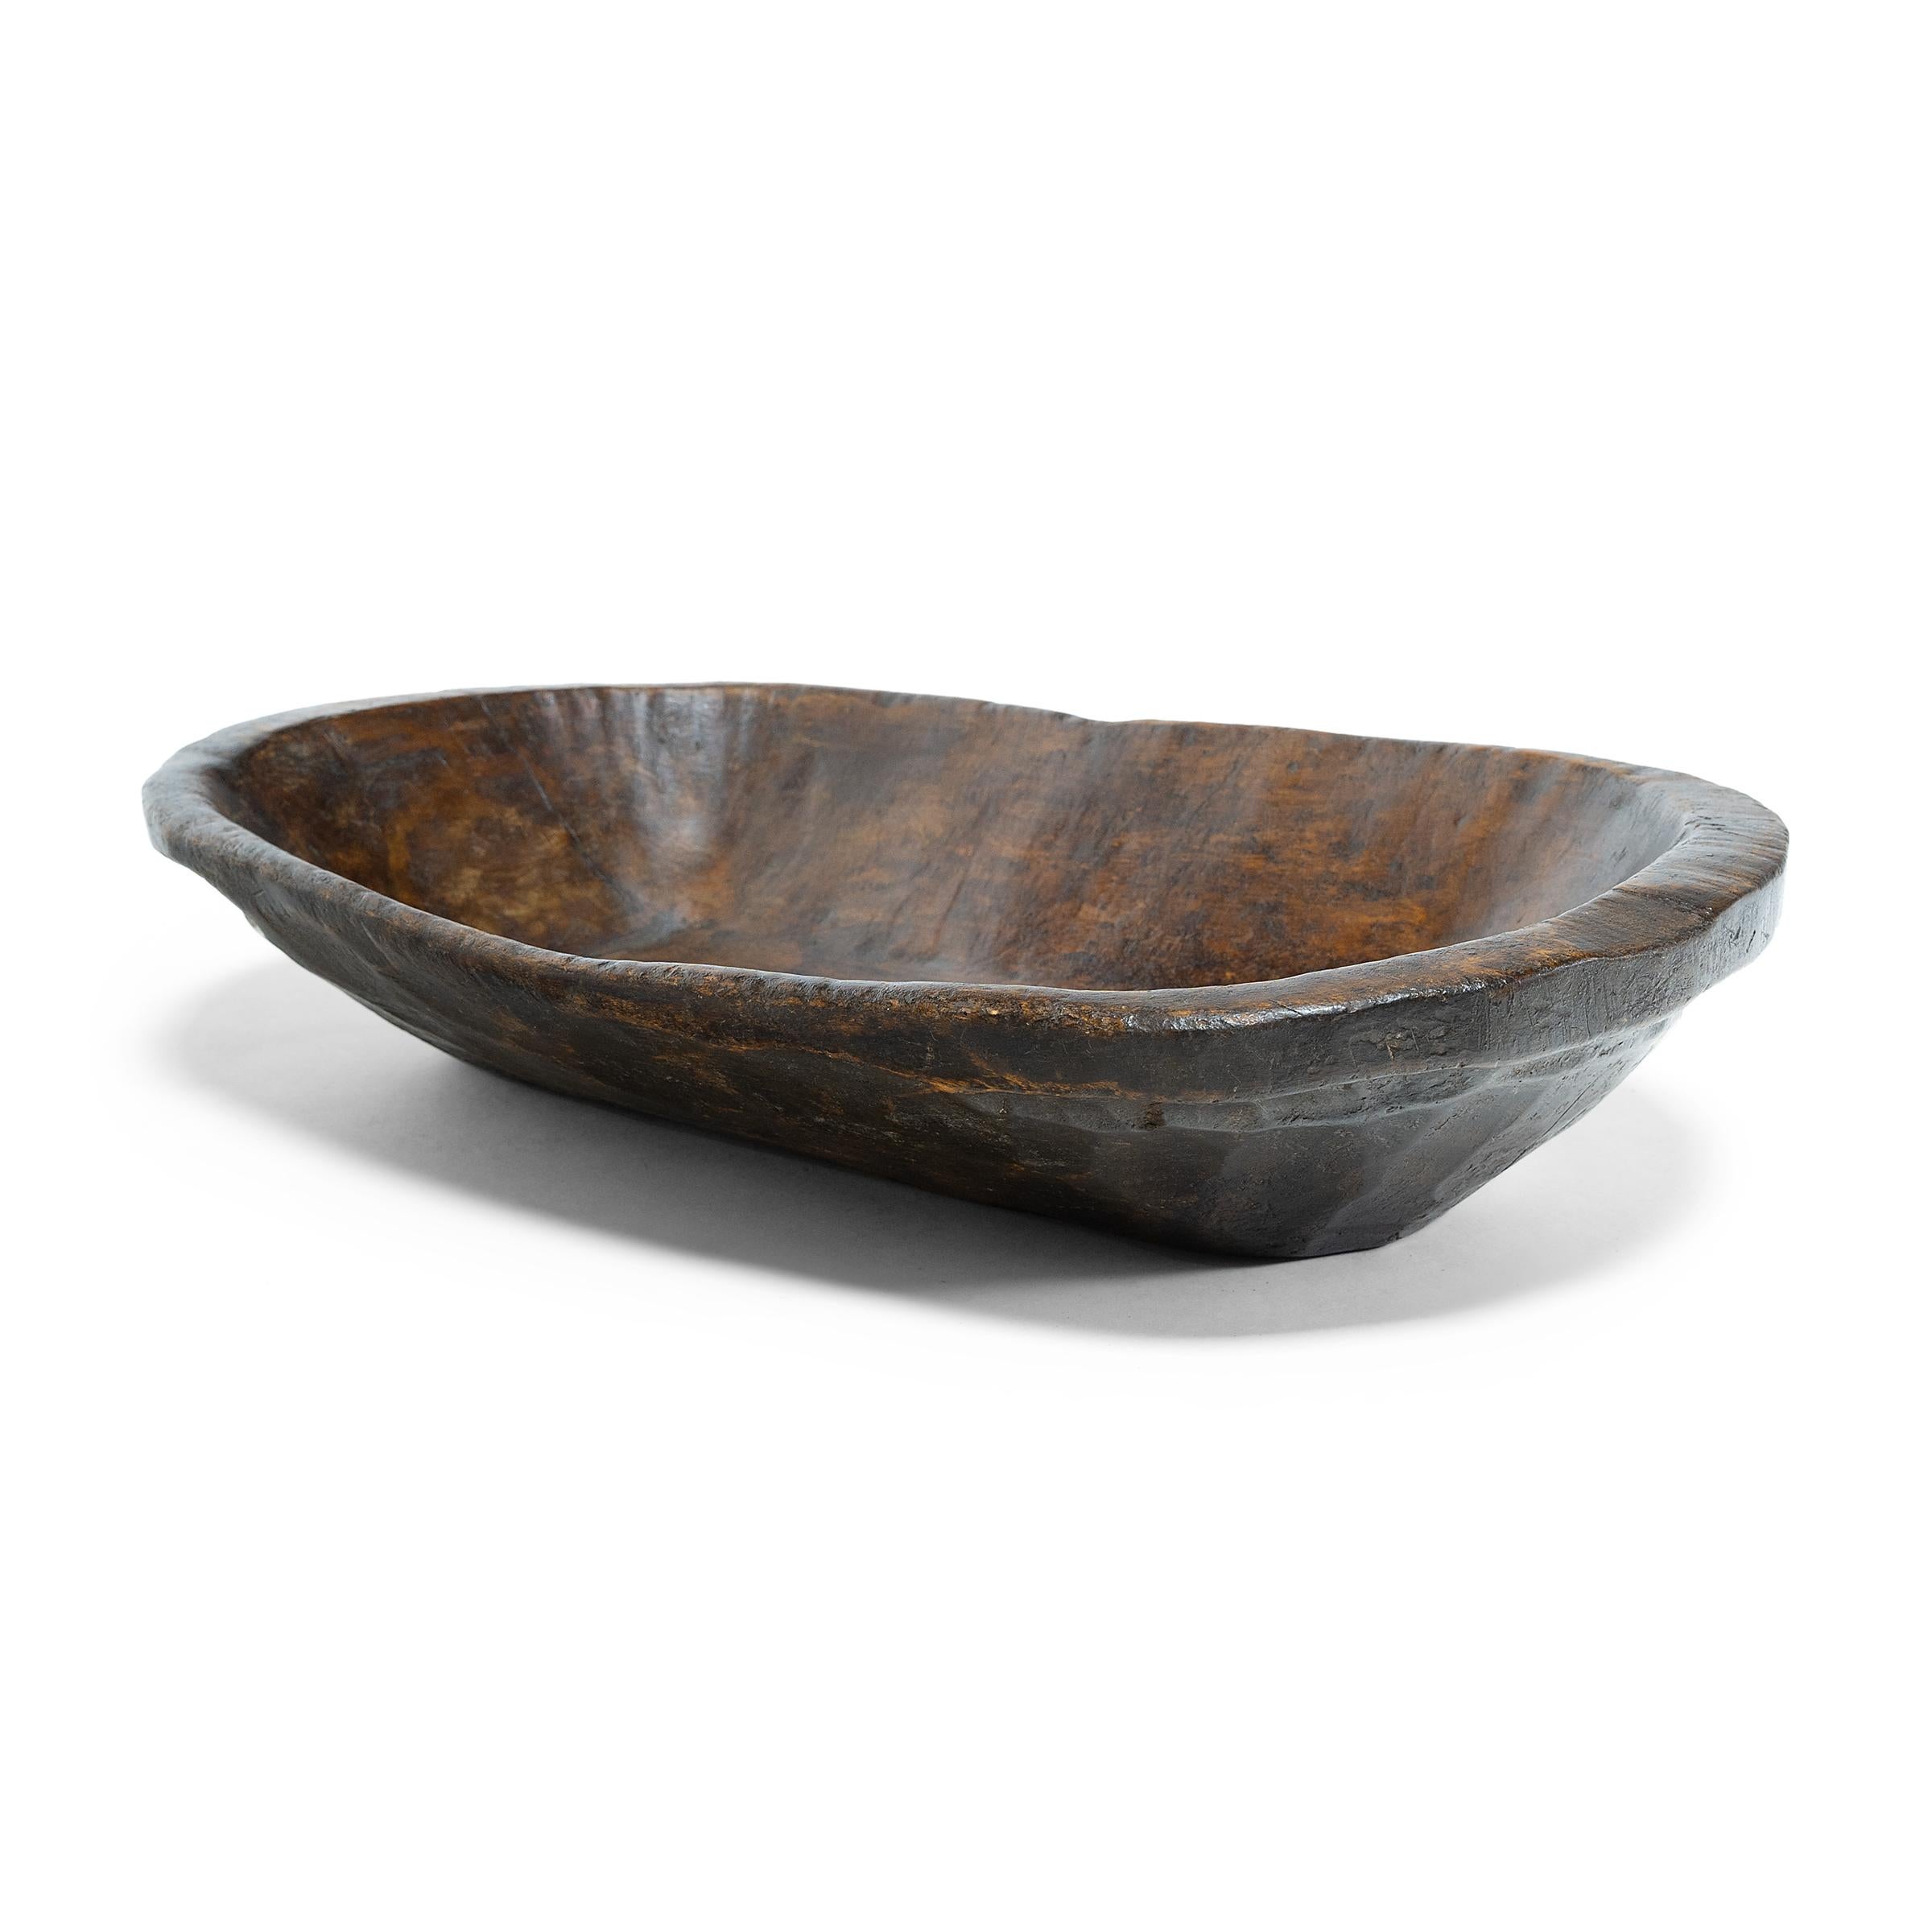 This wooden tray from northern China charms with rustic texture and asymmetric form. Hand-carved from a single block of wood, the tray has an oval shape with rounded corners and tapered sides that flatten at the rim. Years of use have imparted a